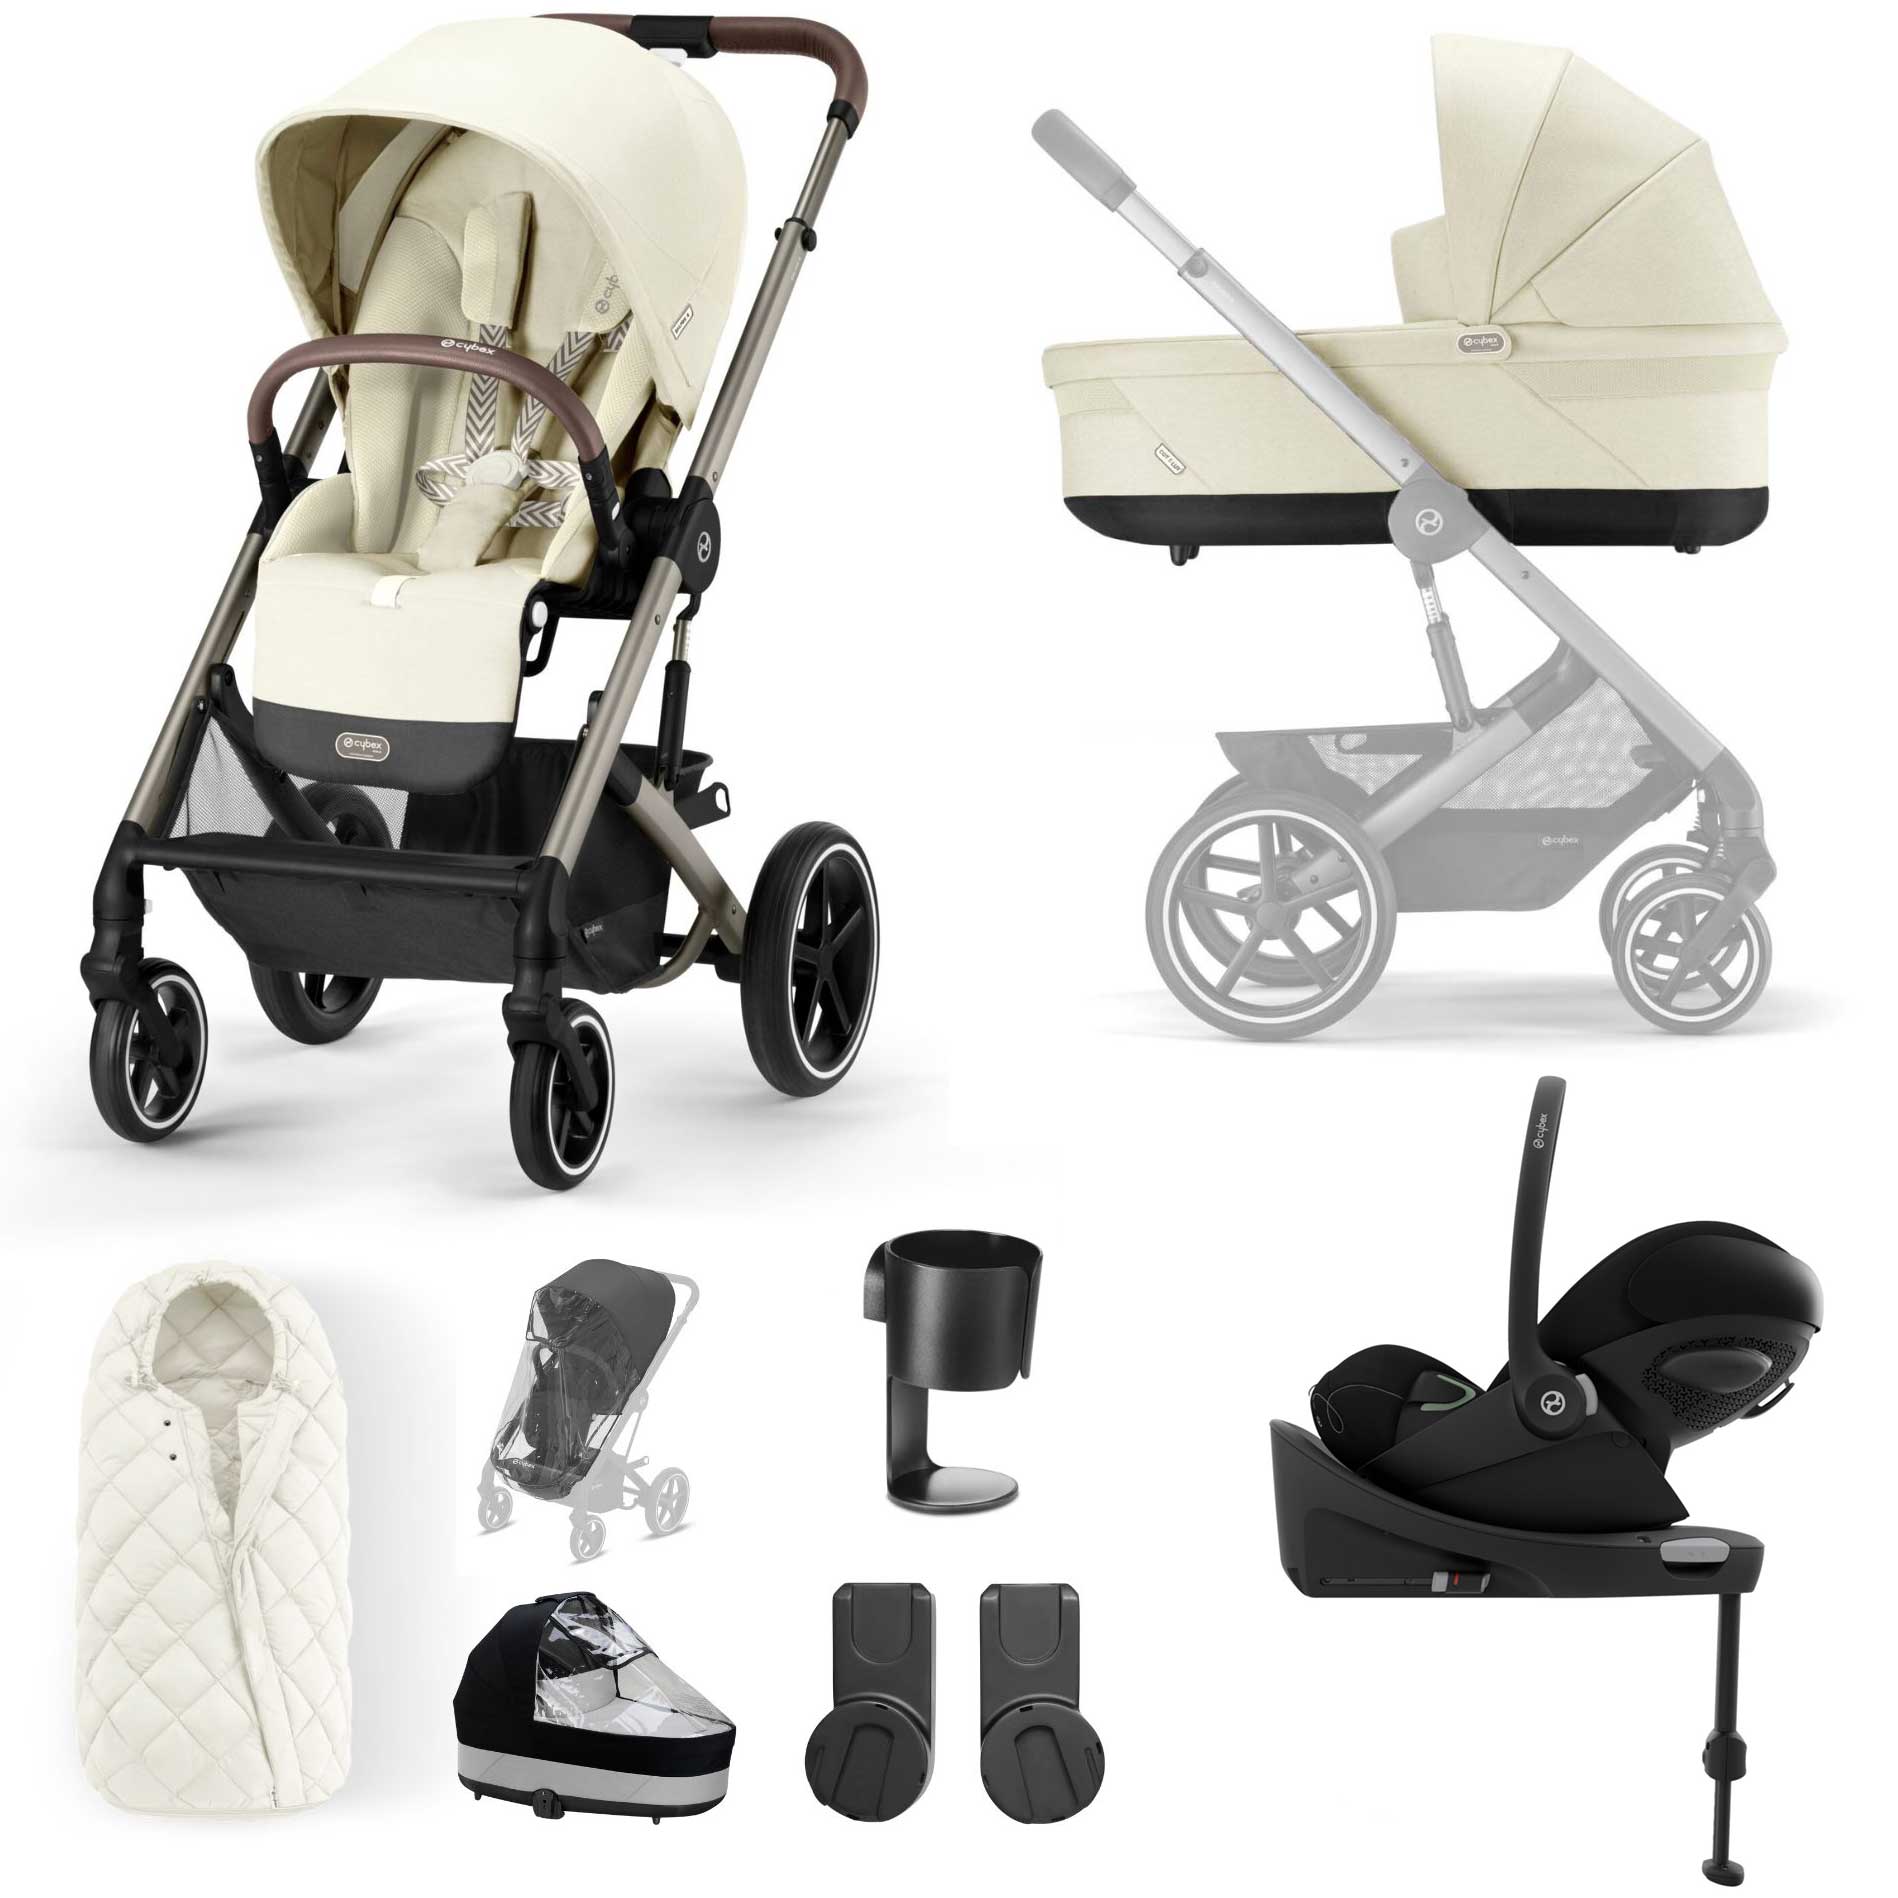 Cybex Balios S Lux Luxury Bundle in Taupe/Seashell Beige Travel Systems 14668-TPE-SEA-BEI 4063846318124